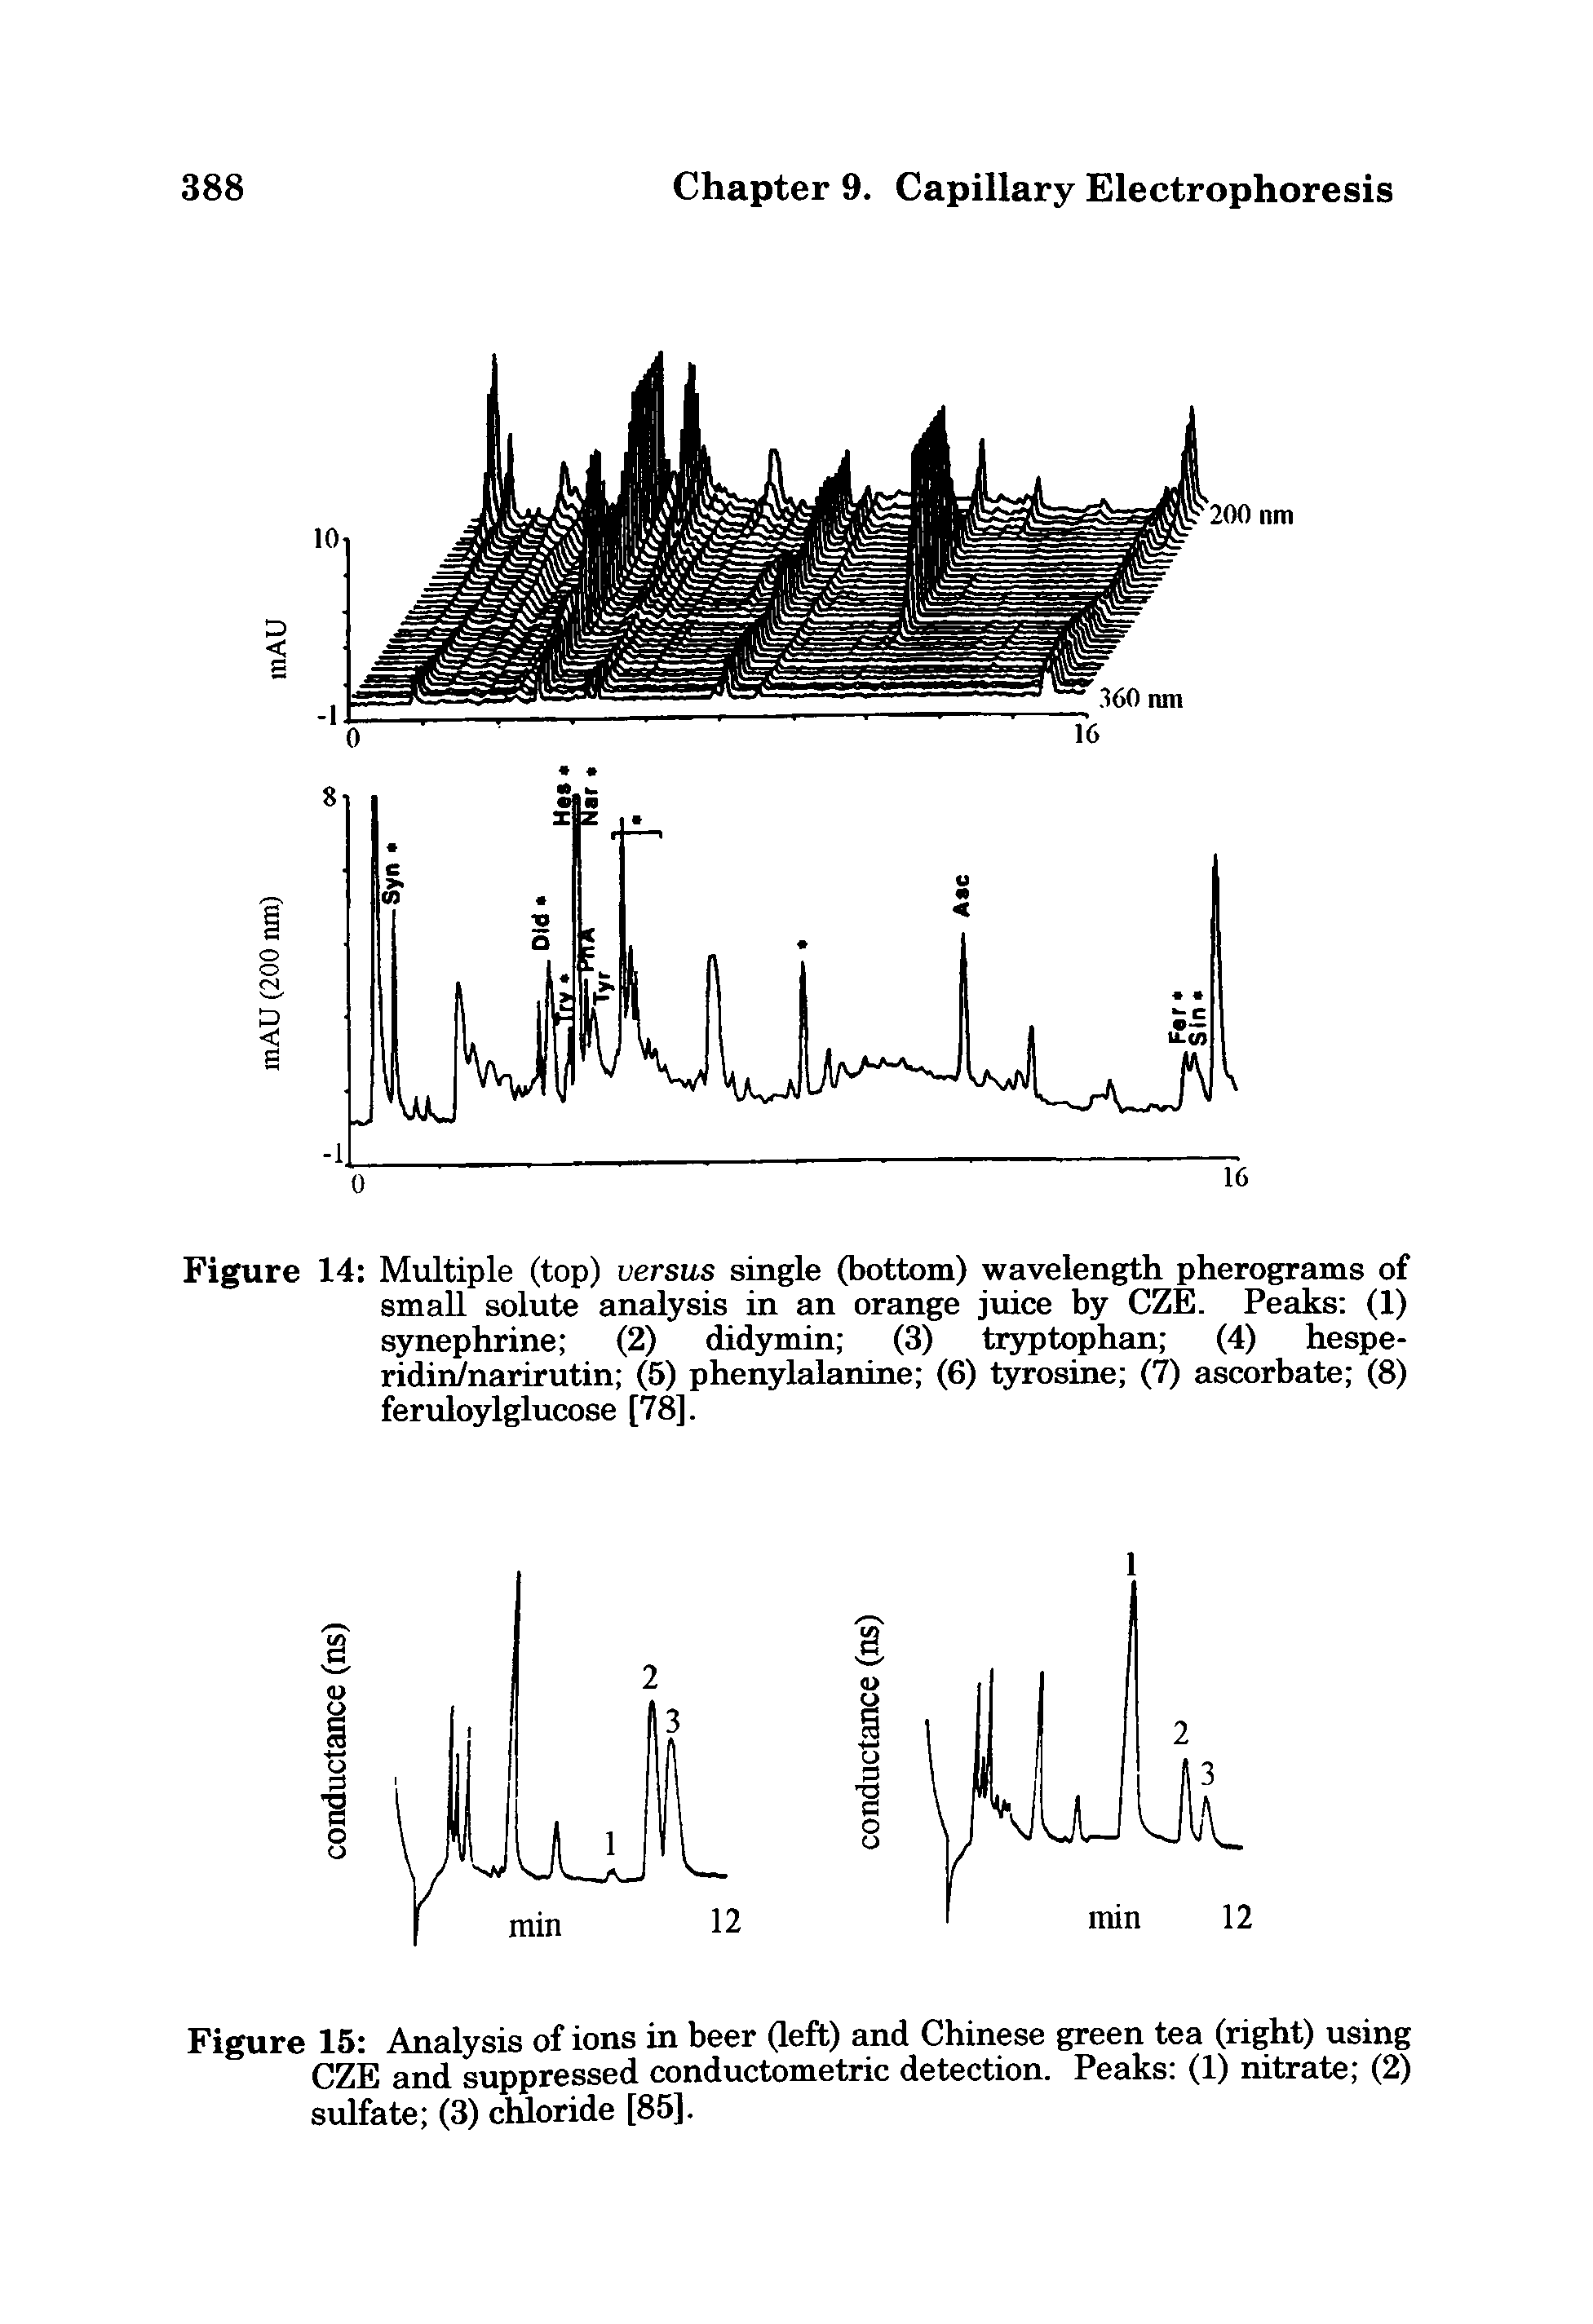 Figure 15 Analysis of ions in beer (left) and Chinese green tea (right) using CZE and suppressed conductometric detection. Peaks (1) nitrate (2) sulfate (3) chloride [85].